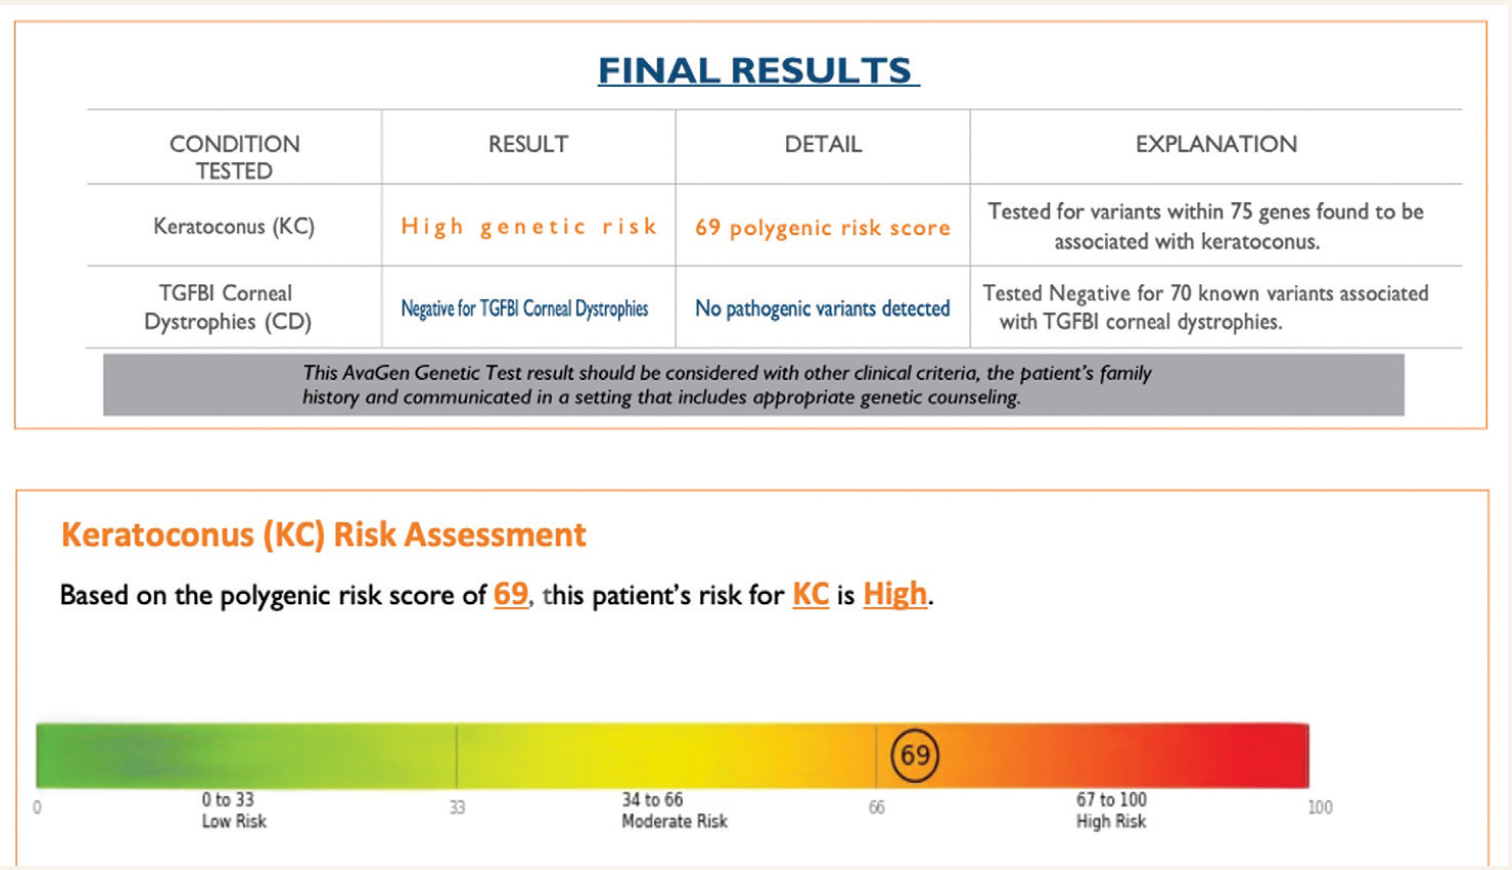 Figure 1. Results from 32-year-old patient. Genetic testing for keratoconus facilitates earlier recognition of condition